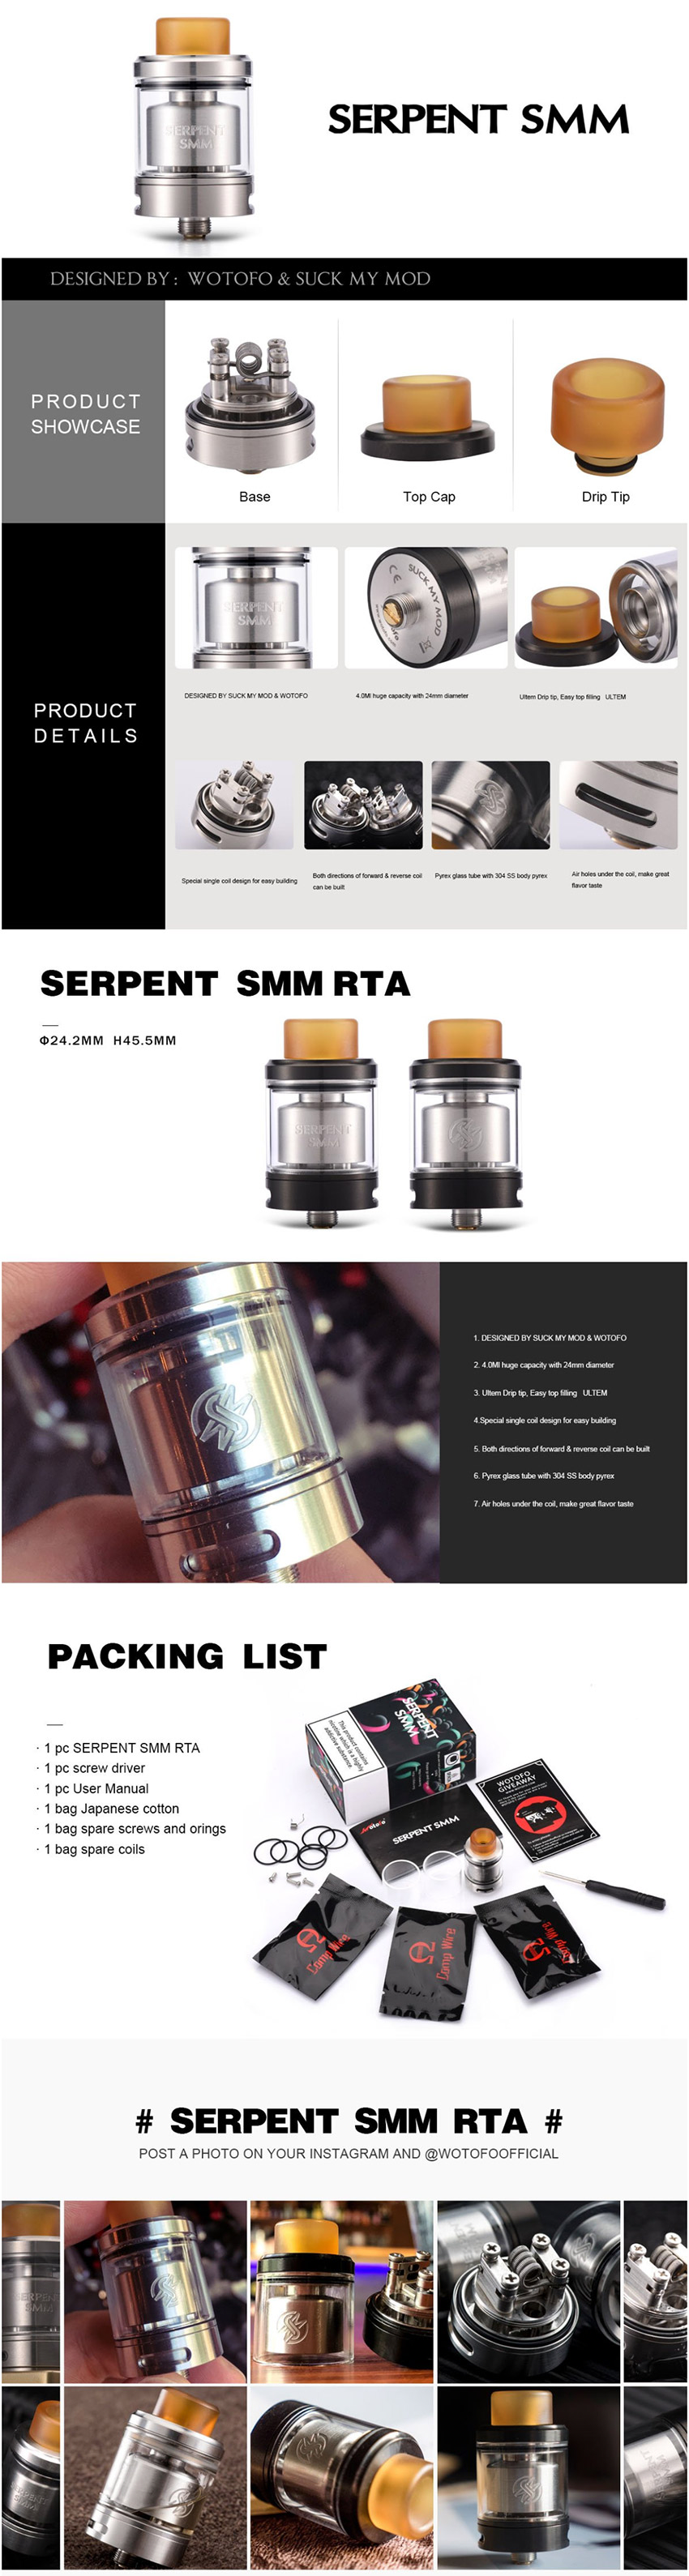 Serpent SMM By WOTOFO